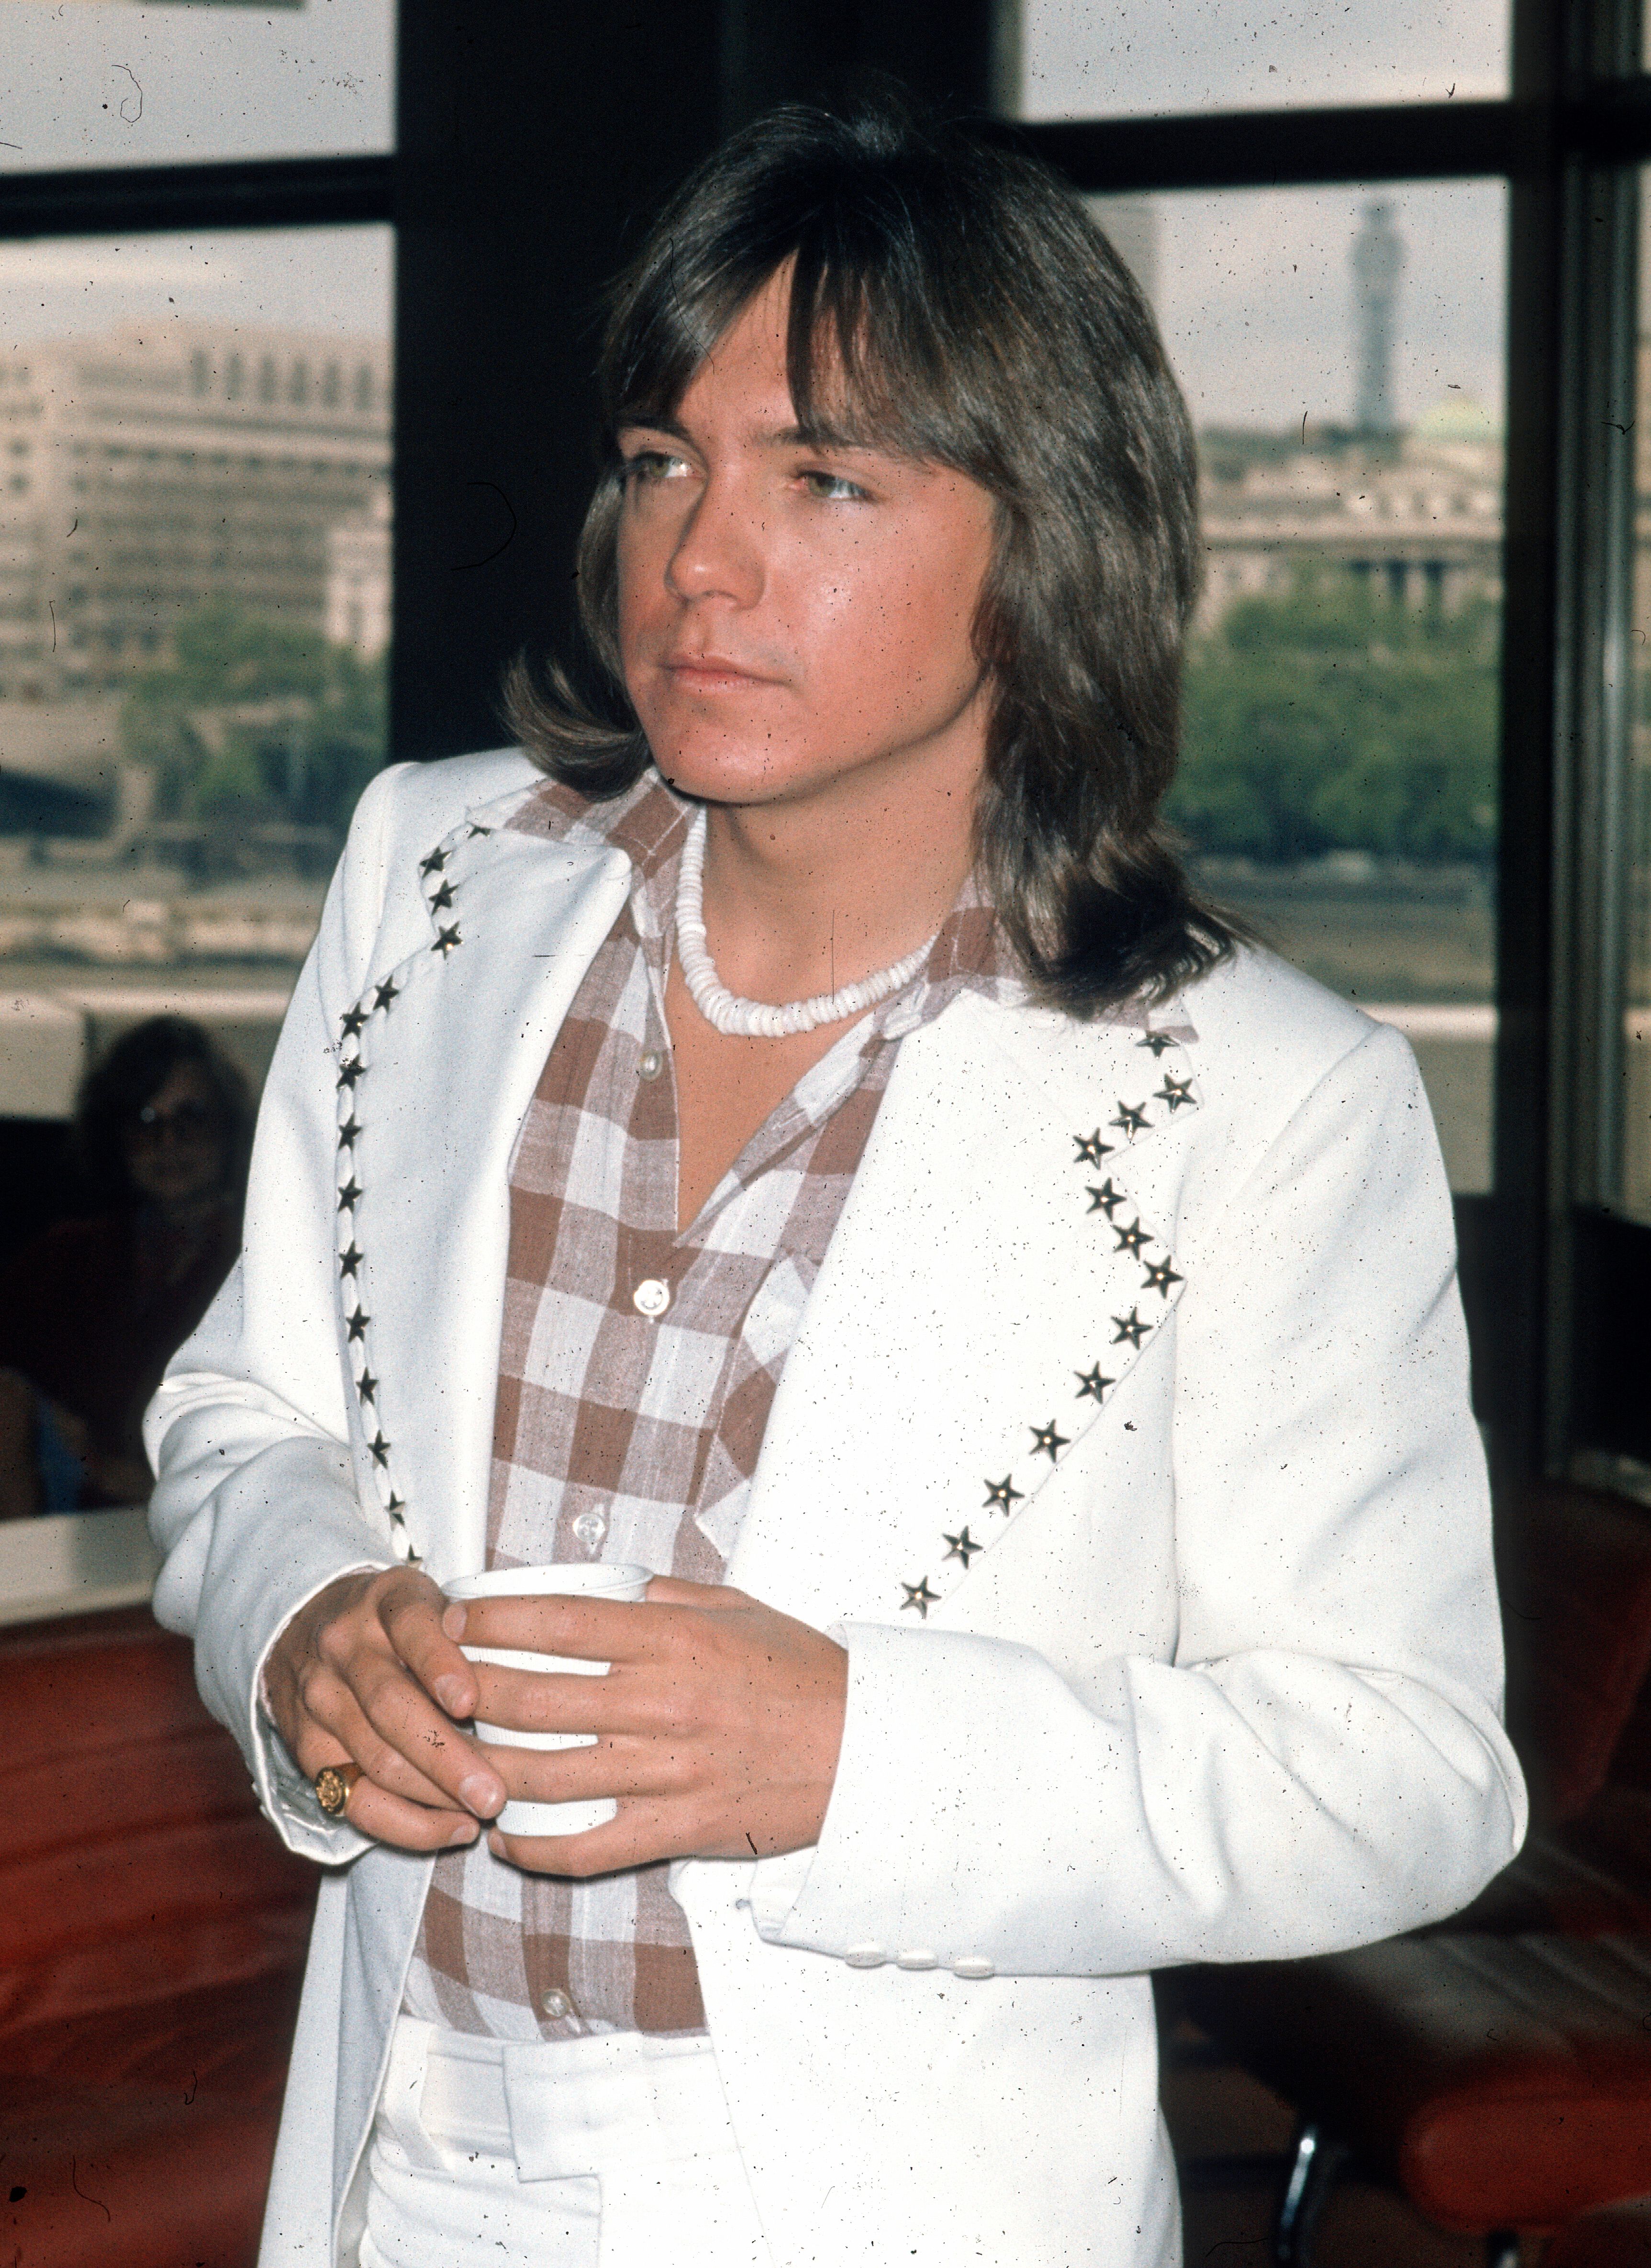 David Cassidy at a press conference in the LWT studios on May 25, 1974, London, England. | Source: Anwar Hussein/Getty Images